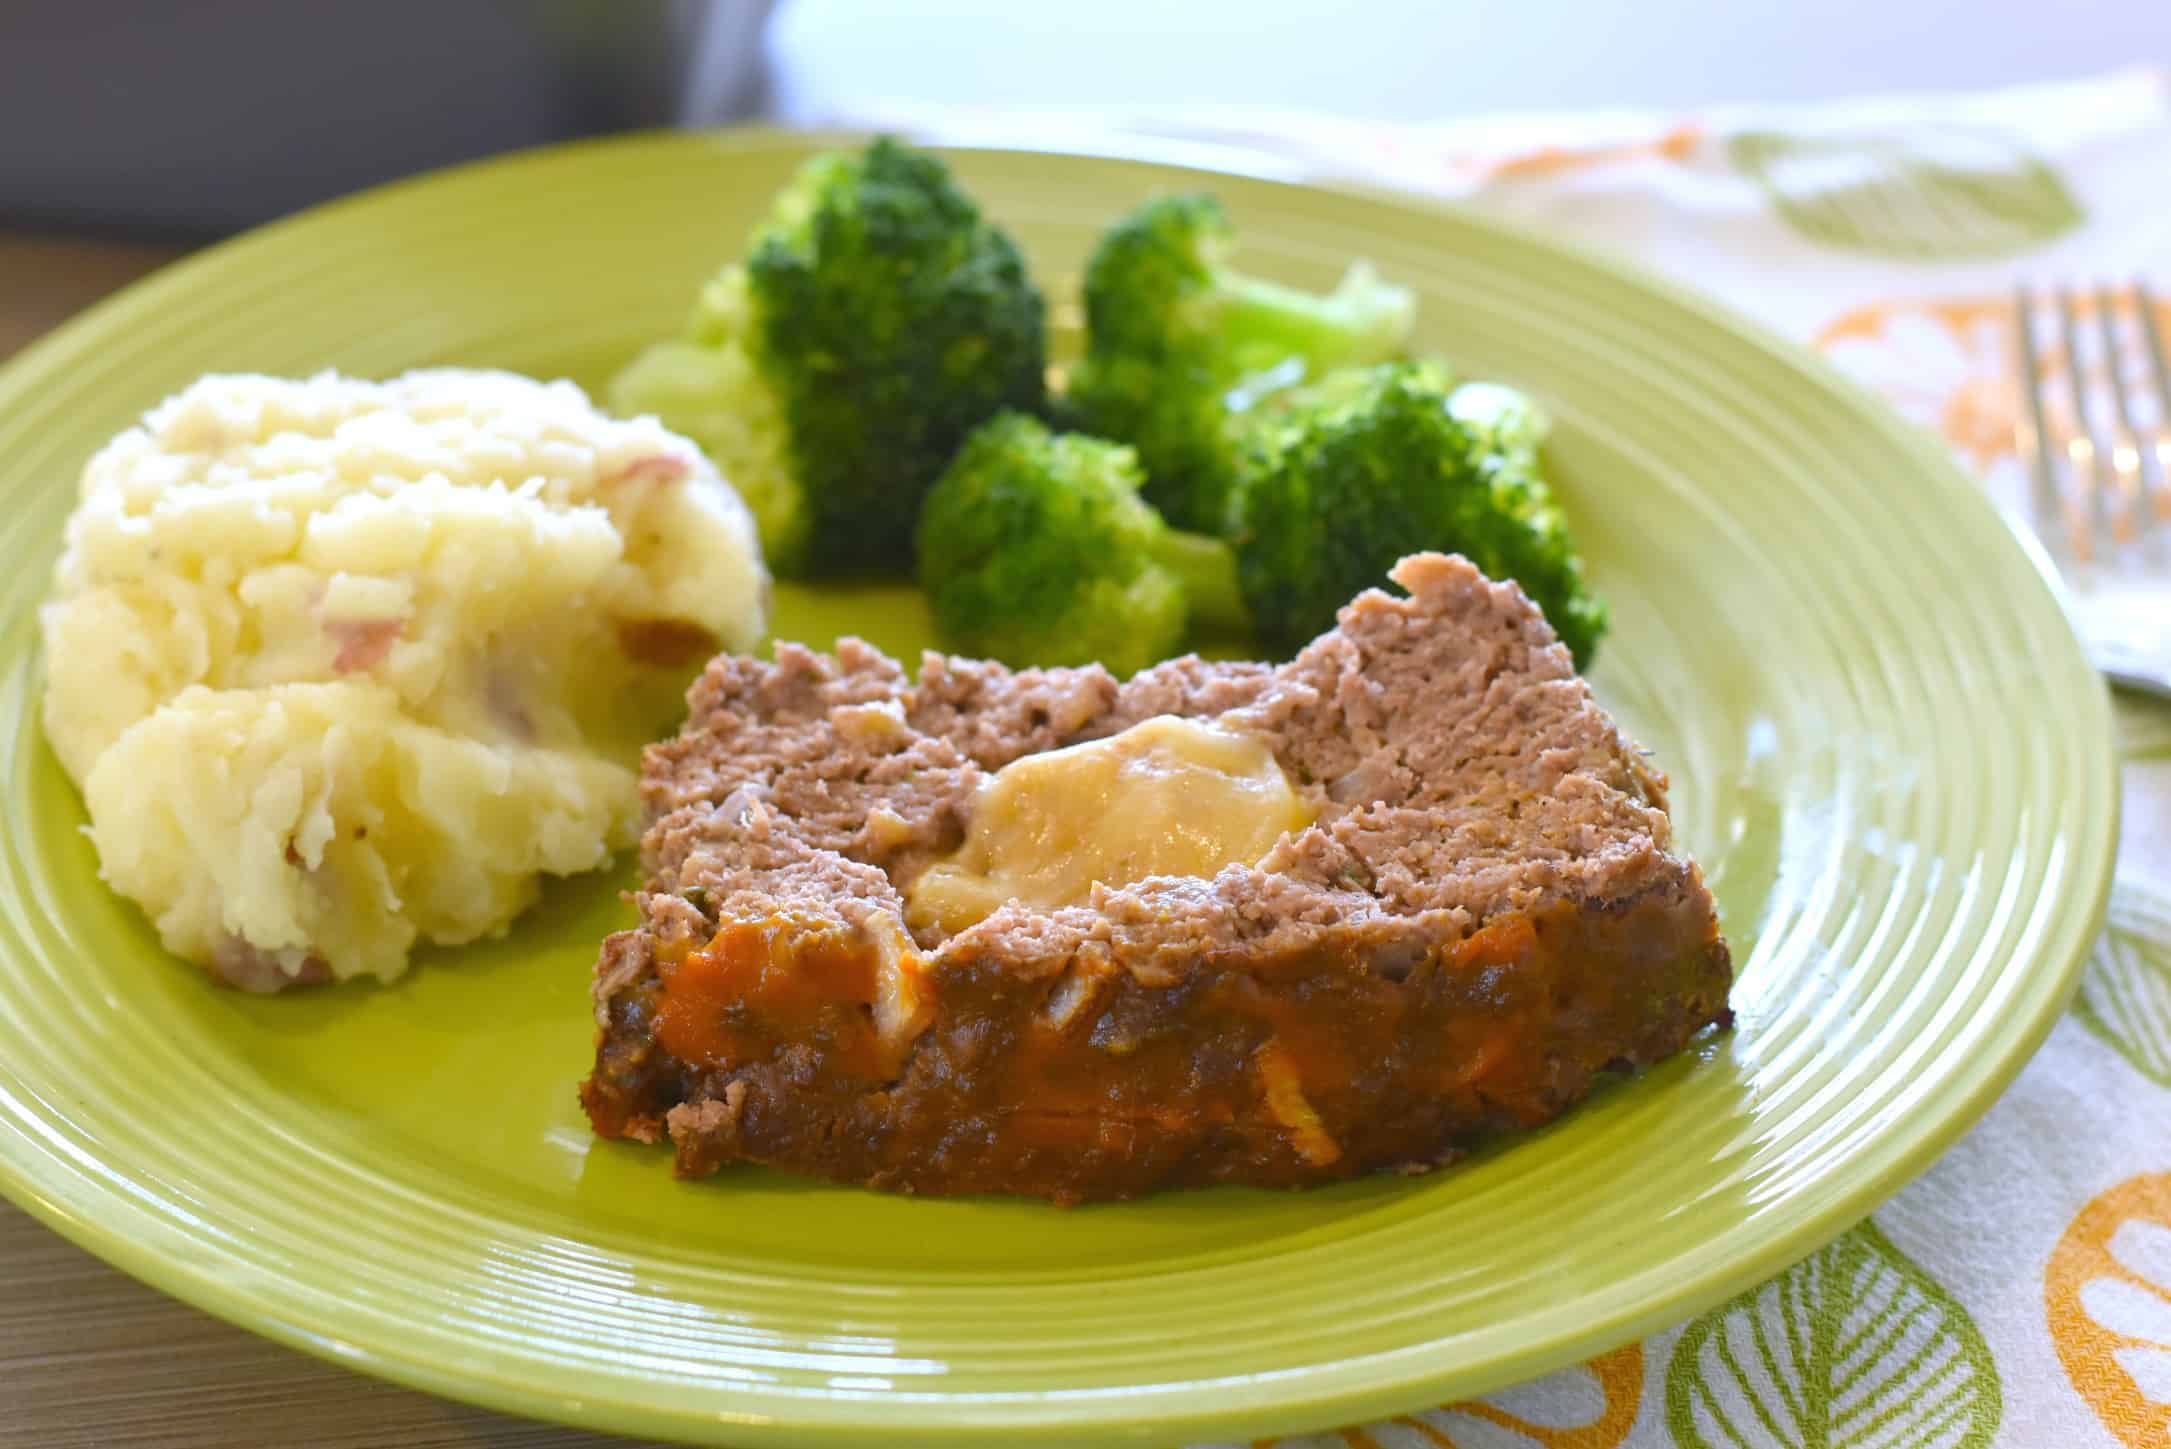 slice of cheeseburger meatloaf with mashed potatoes and broccoli